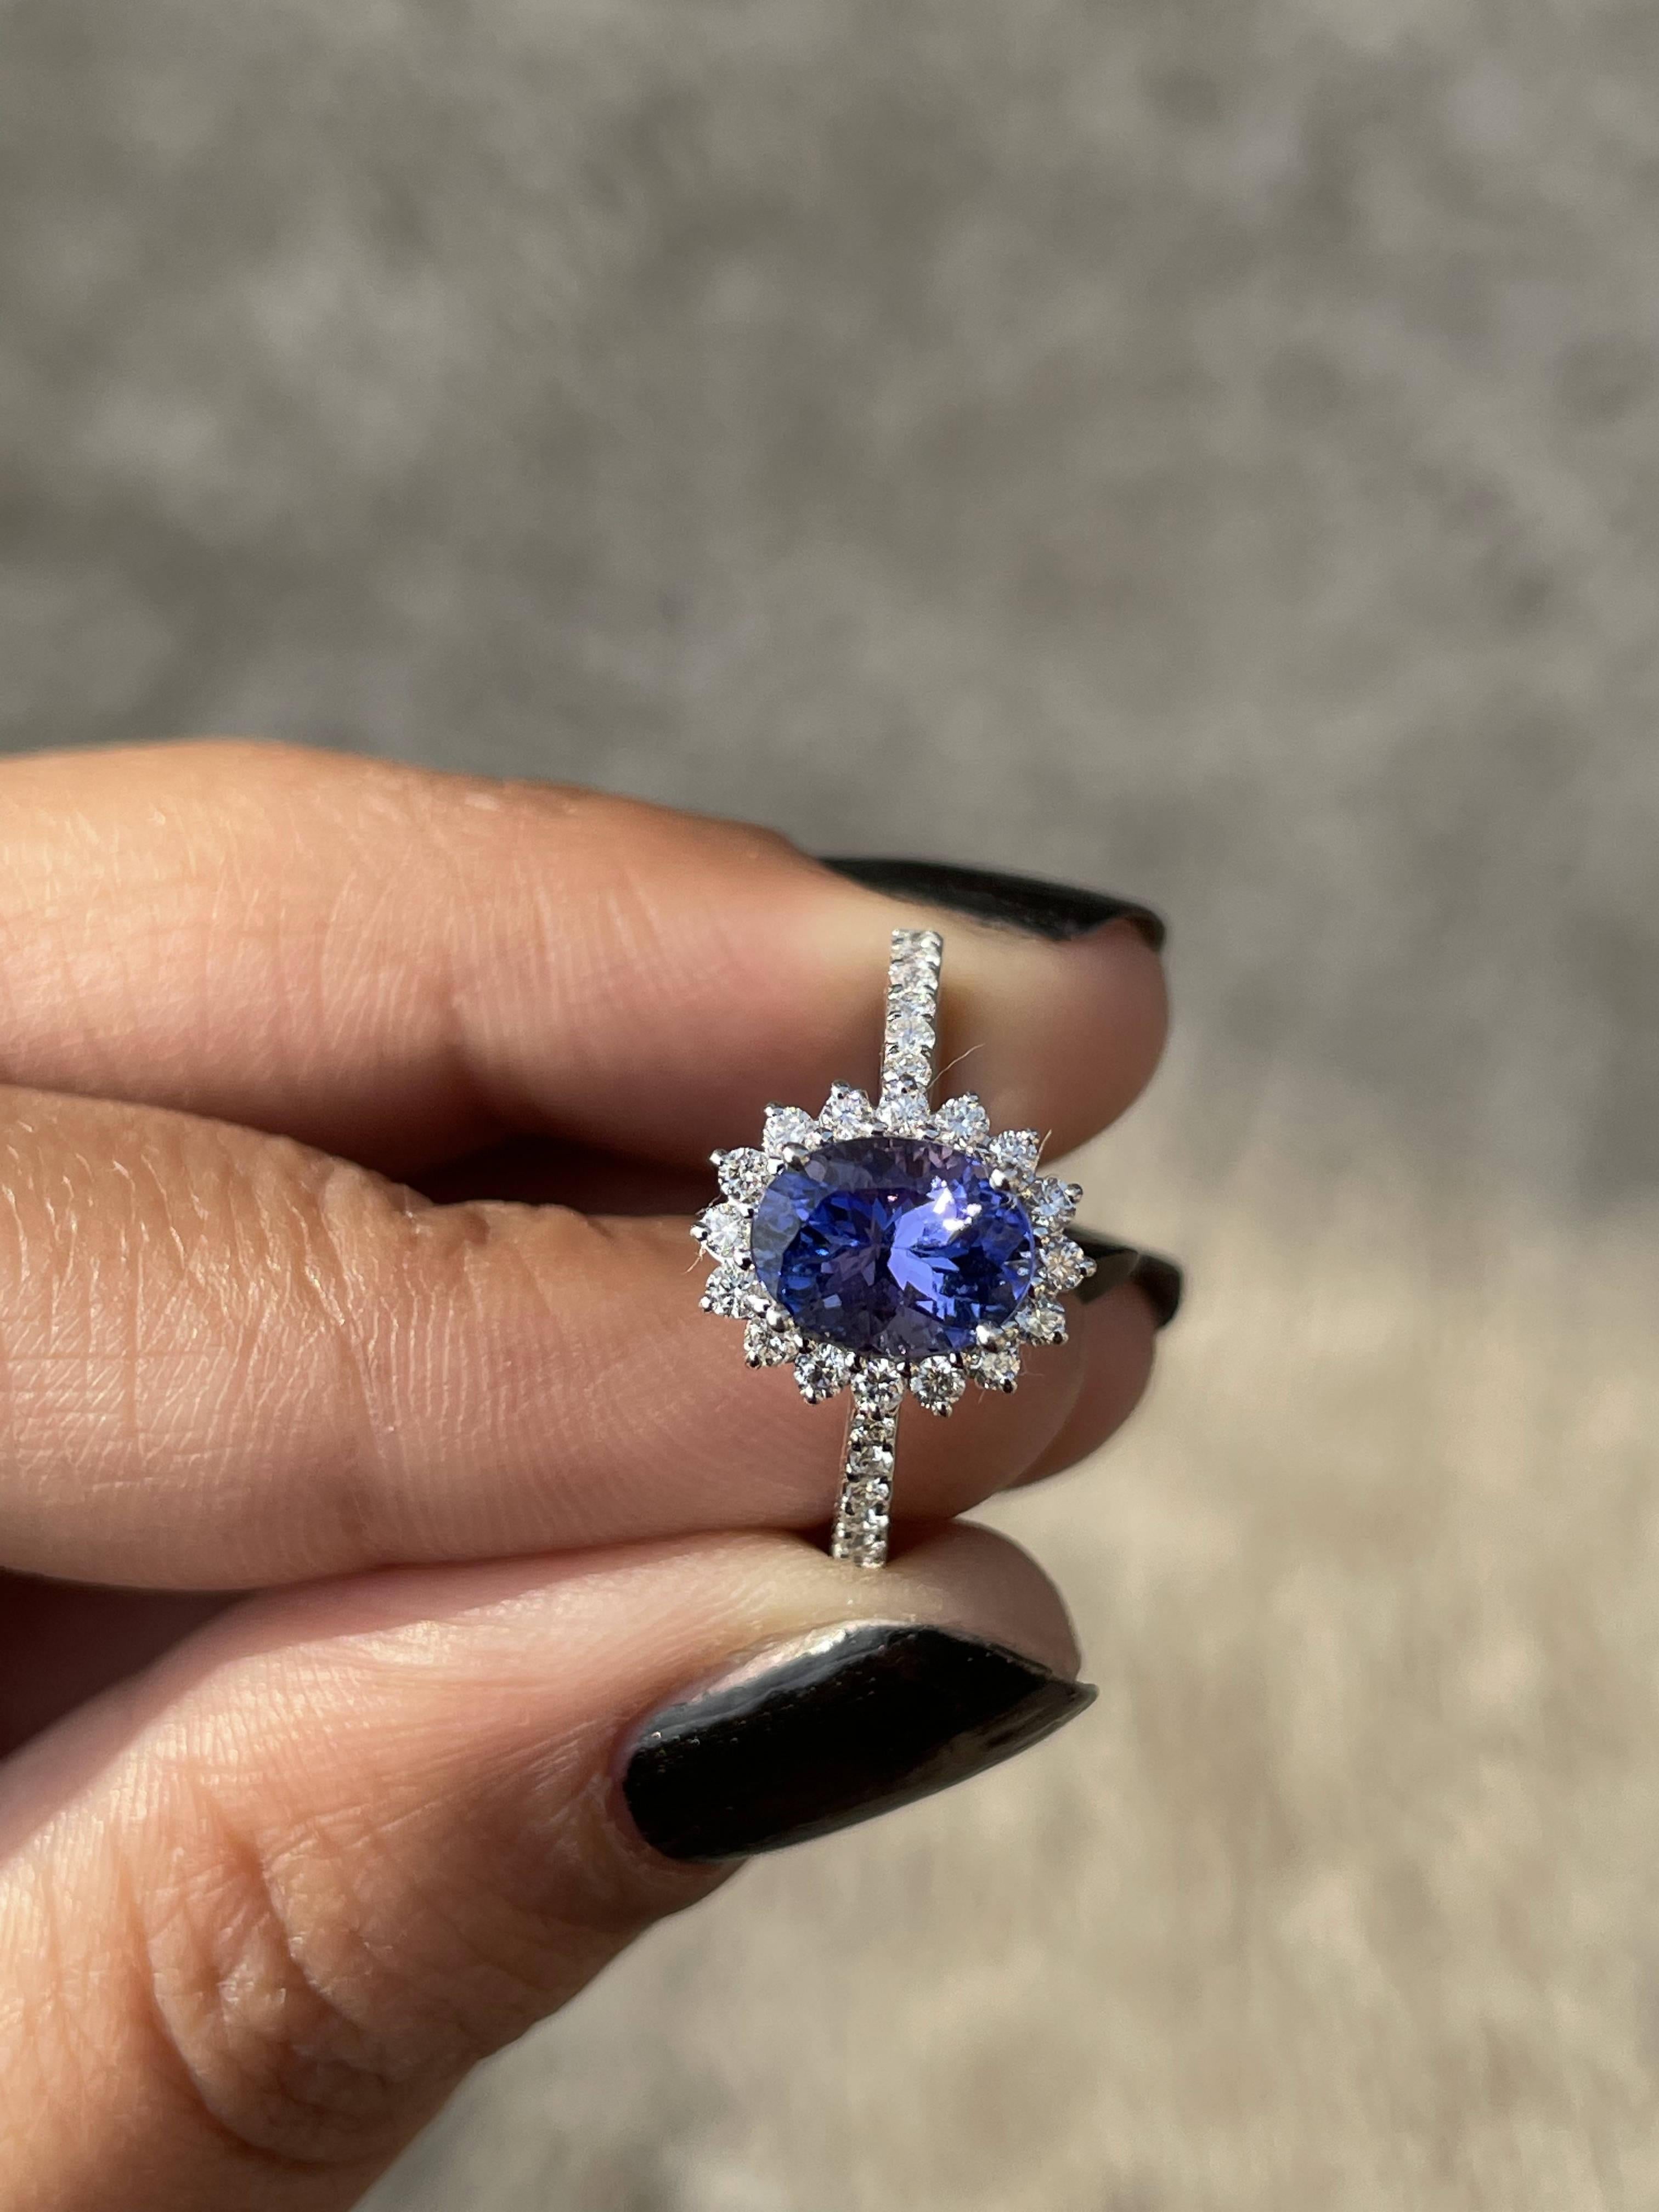 For Sale:  1.59 Carat Natural Tanzanite and Diamond Ring in 18k Solid White Gold 7